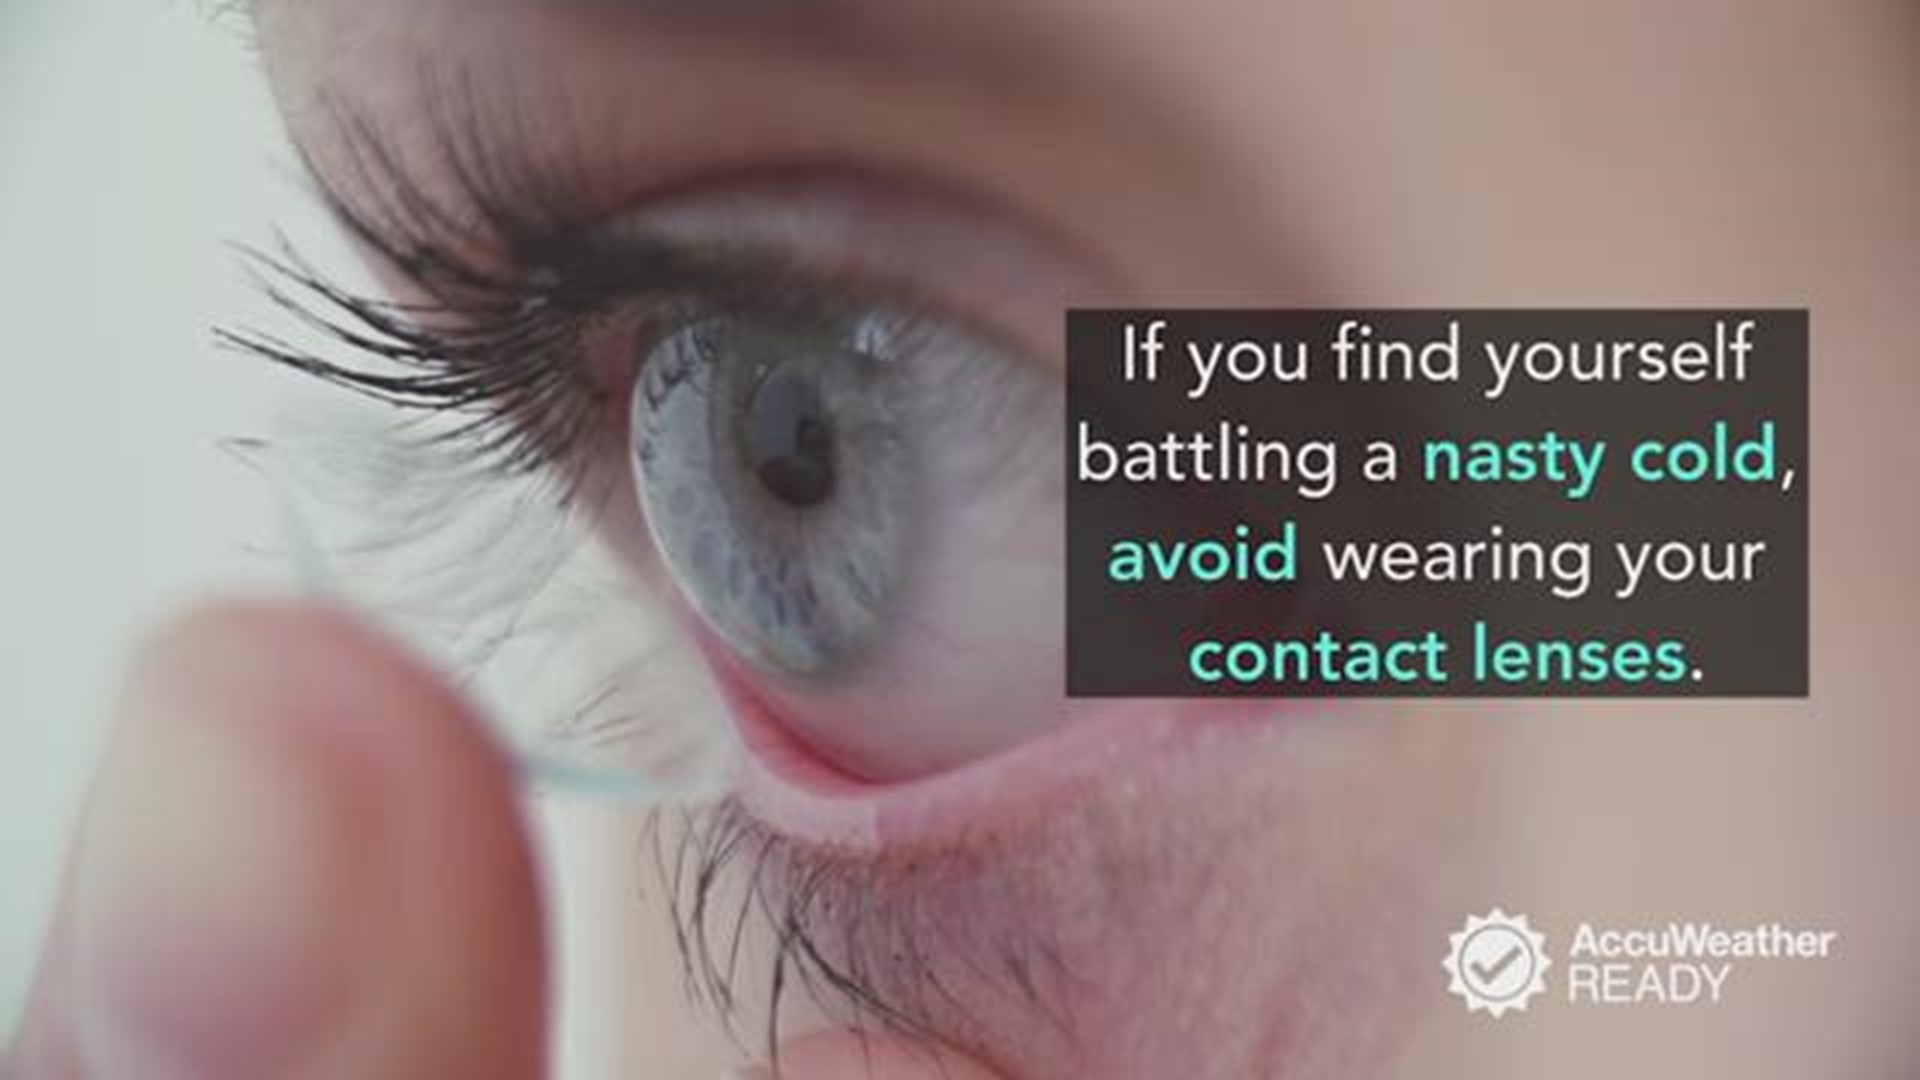 Wearing contact lenses while you're ill can do more harm than good, and could to lead to an eye infection, according to experts.